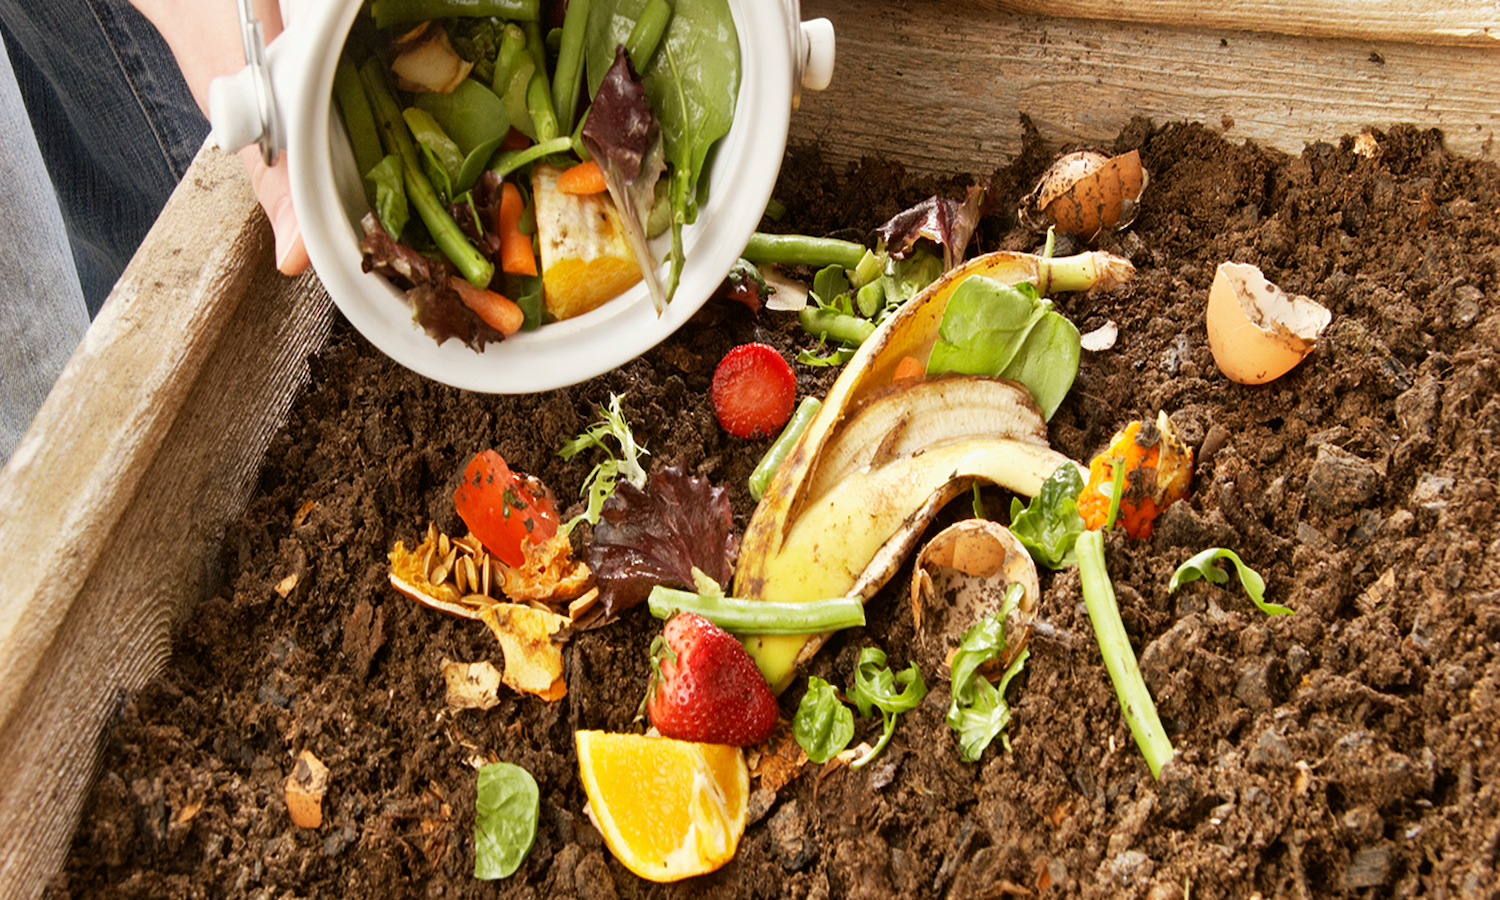 Small scale composting helps build community, improve local soil, and can save cities up to US$250,000 a year.